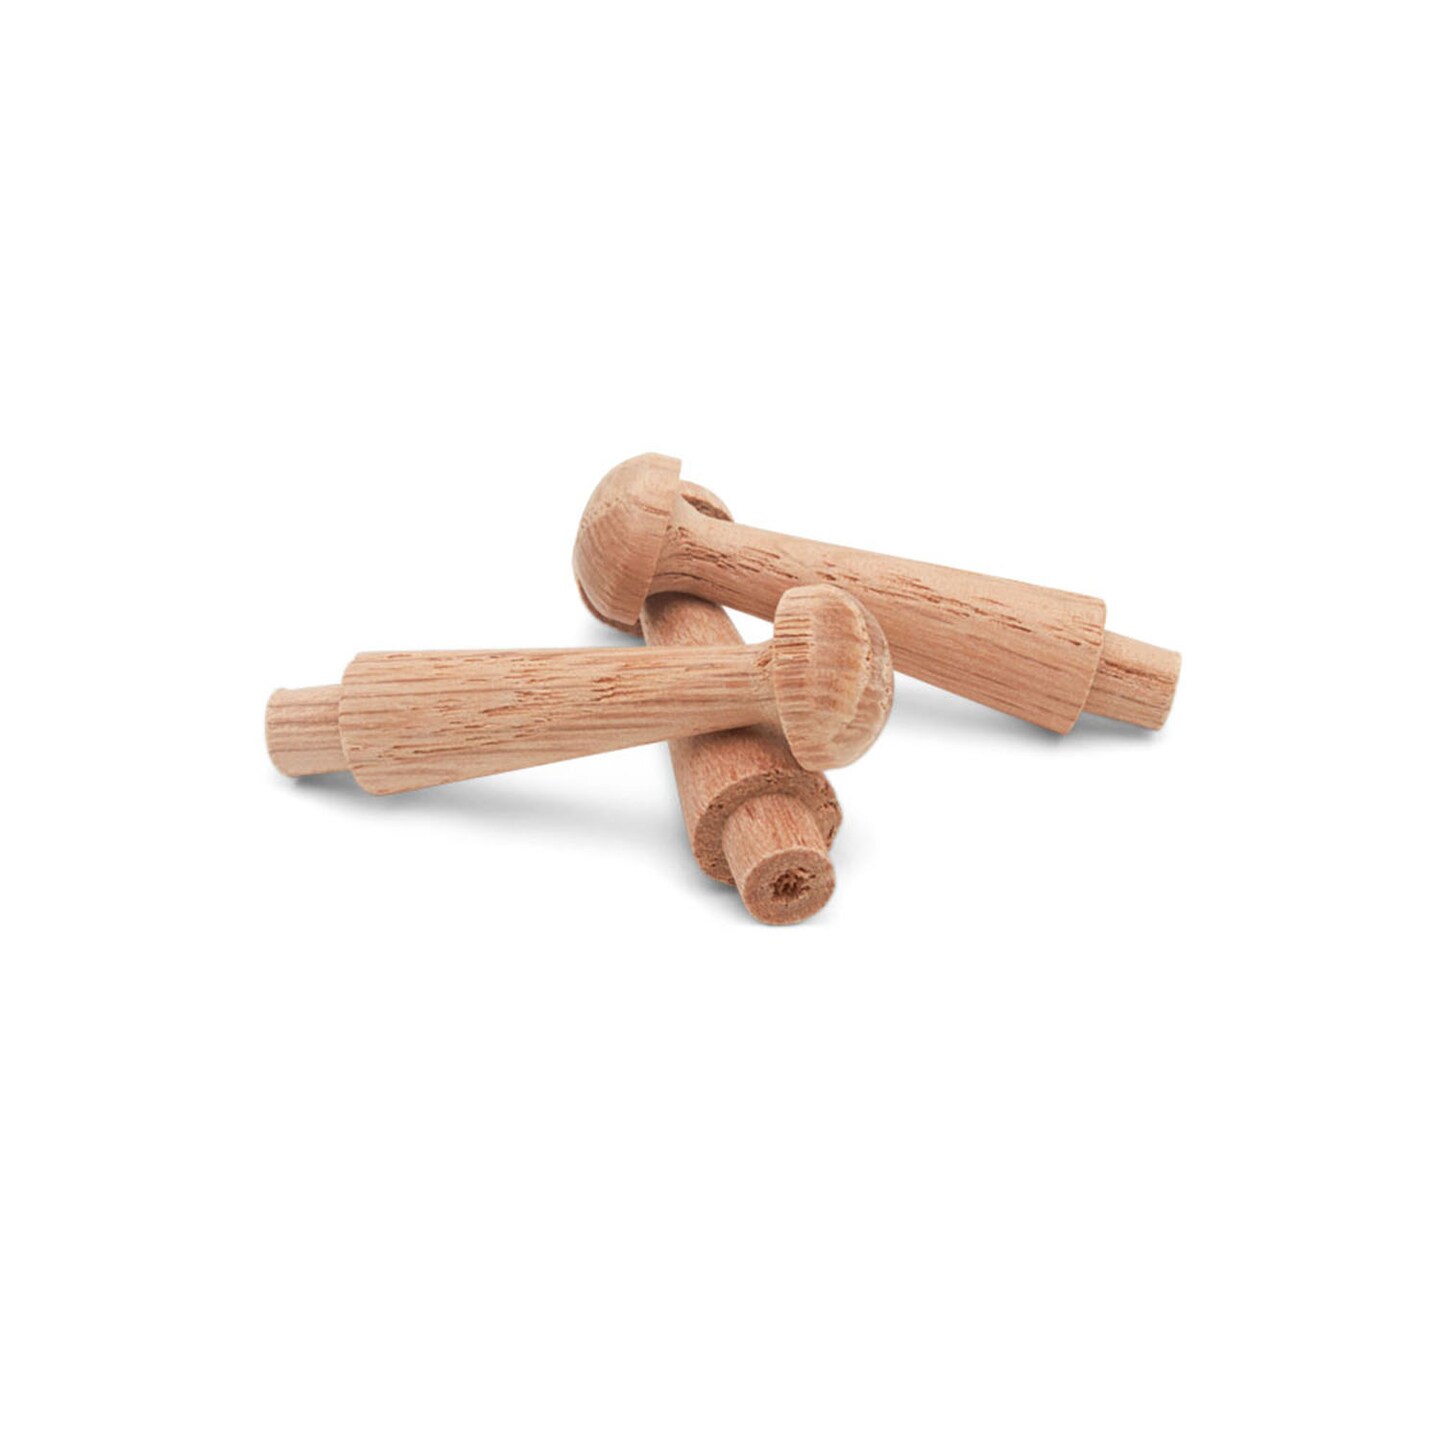 Oak Shaker Peg 2-1/2 inch, Pack of 12 Wooden Pegs for Hanging, DIY Shaker Rack and Rail, by Woodpeckers